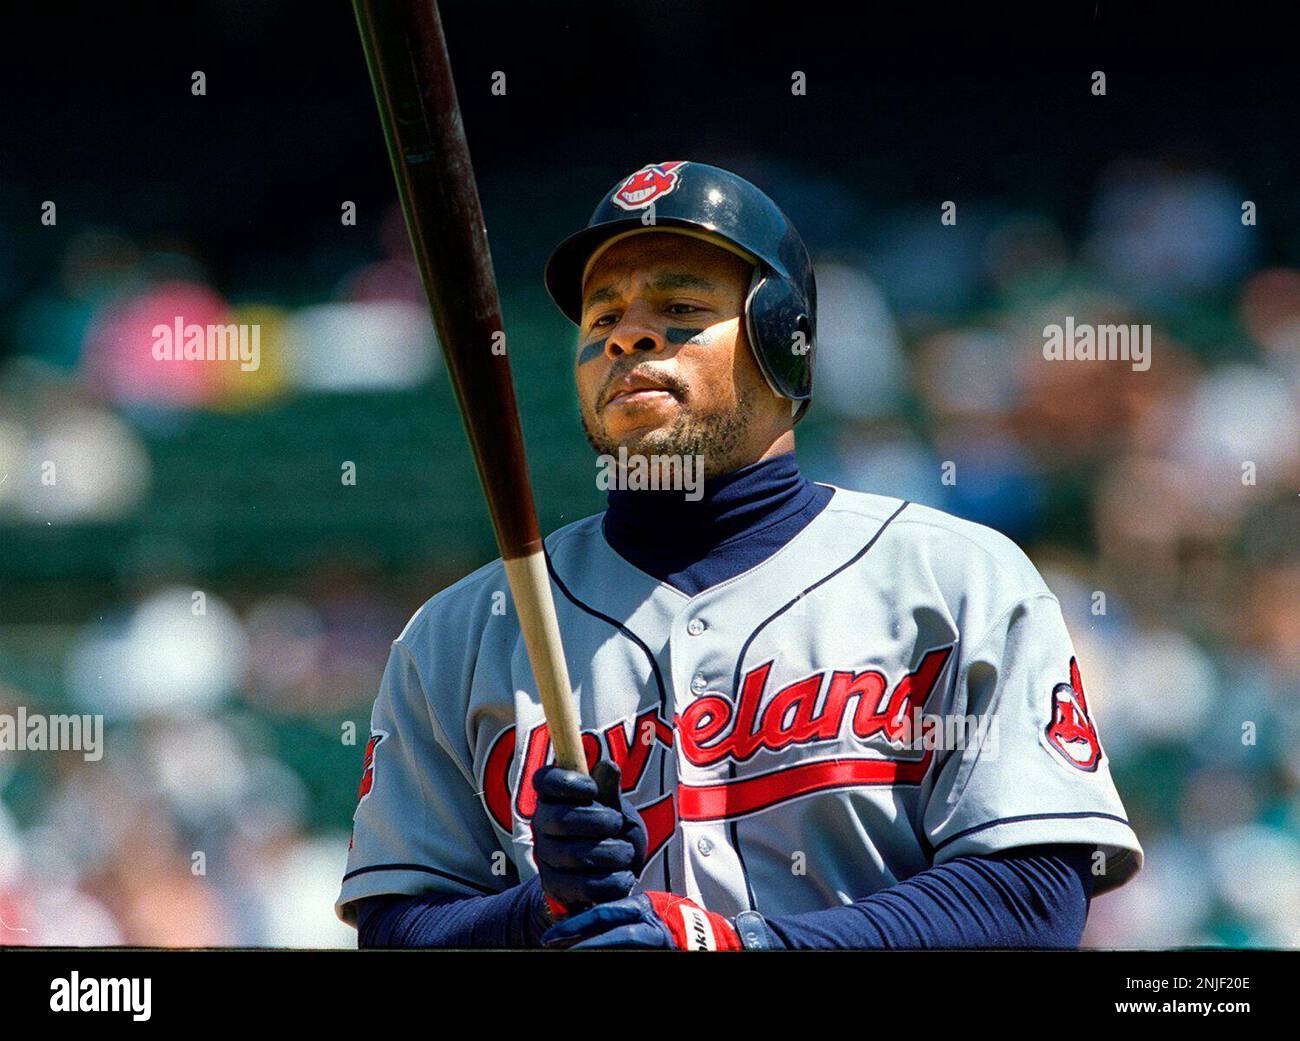 A's 2/C/07MAY96/SP/LH--Cleveland Indians Albert Belle, left field